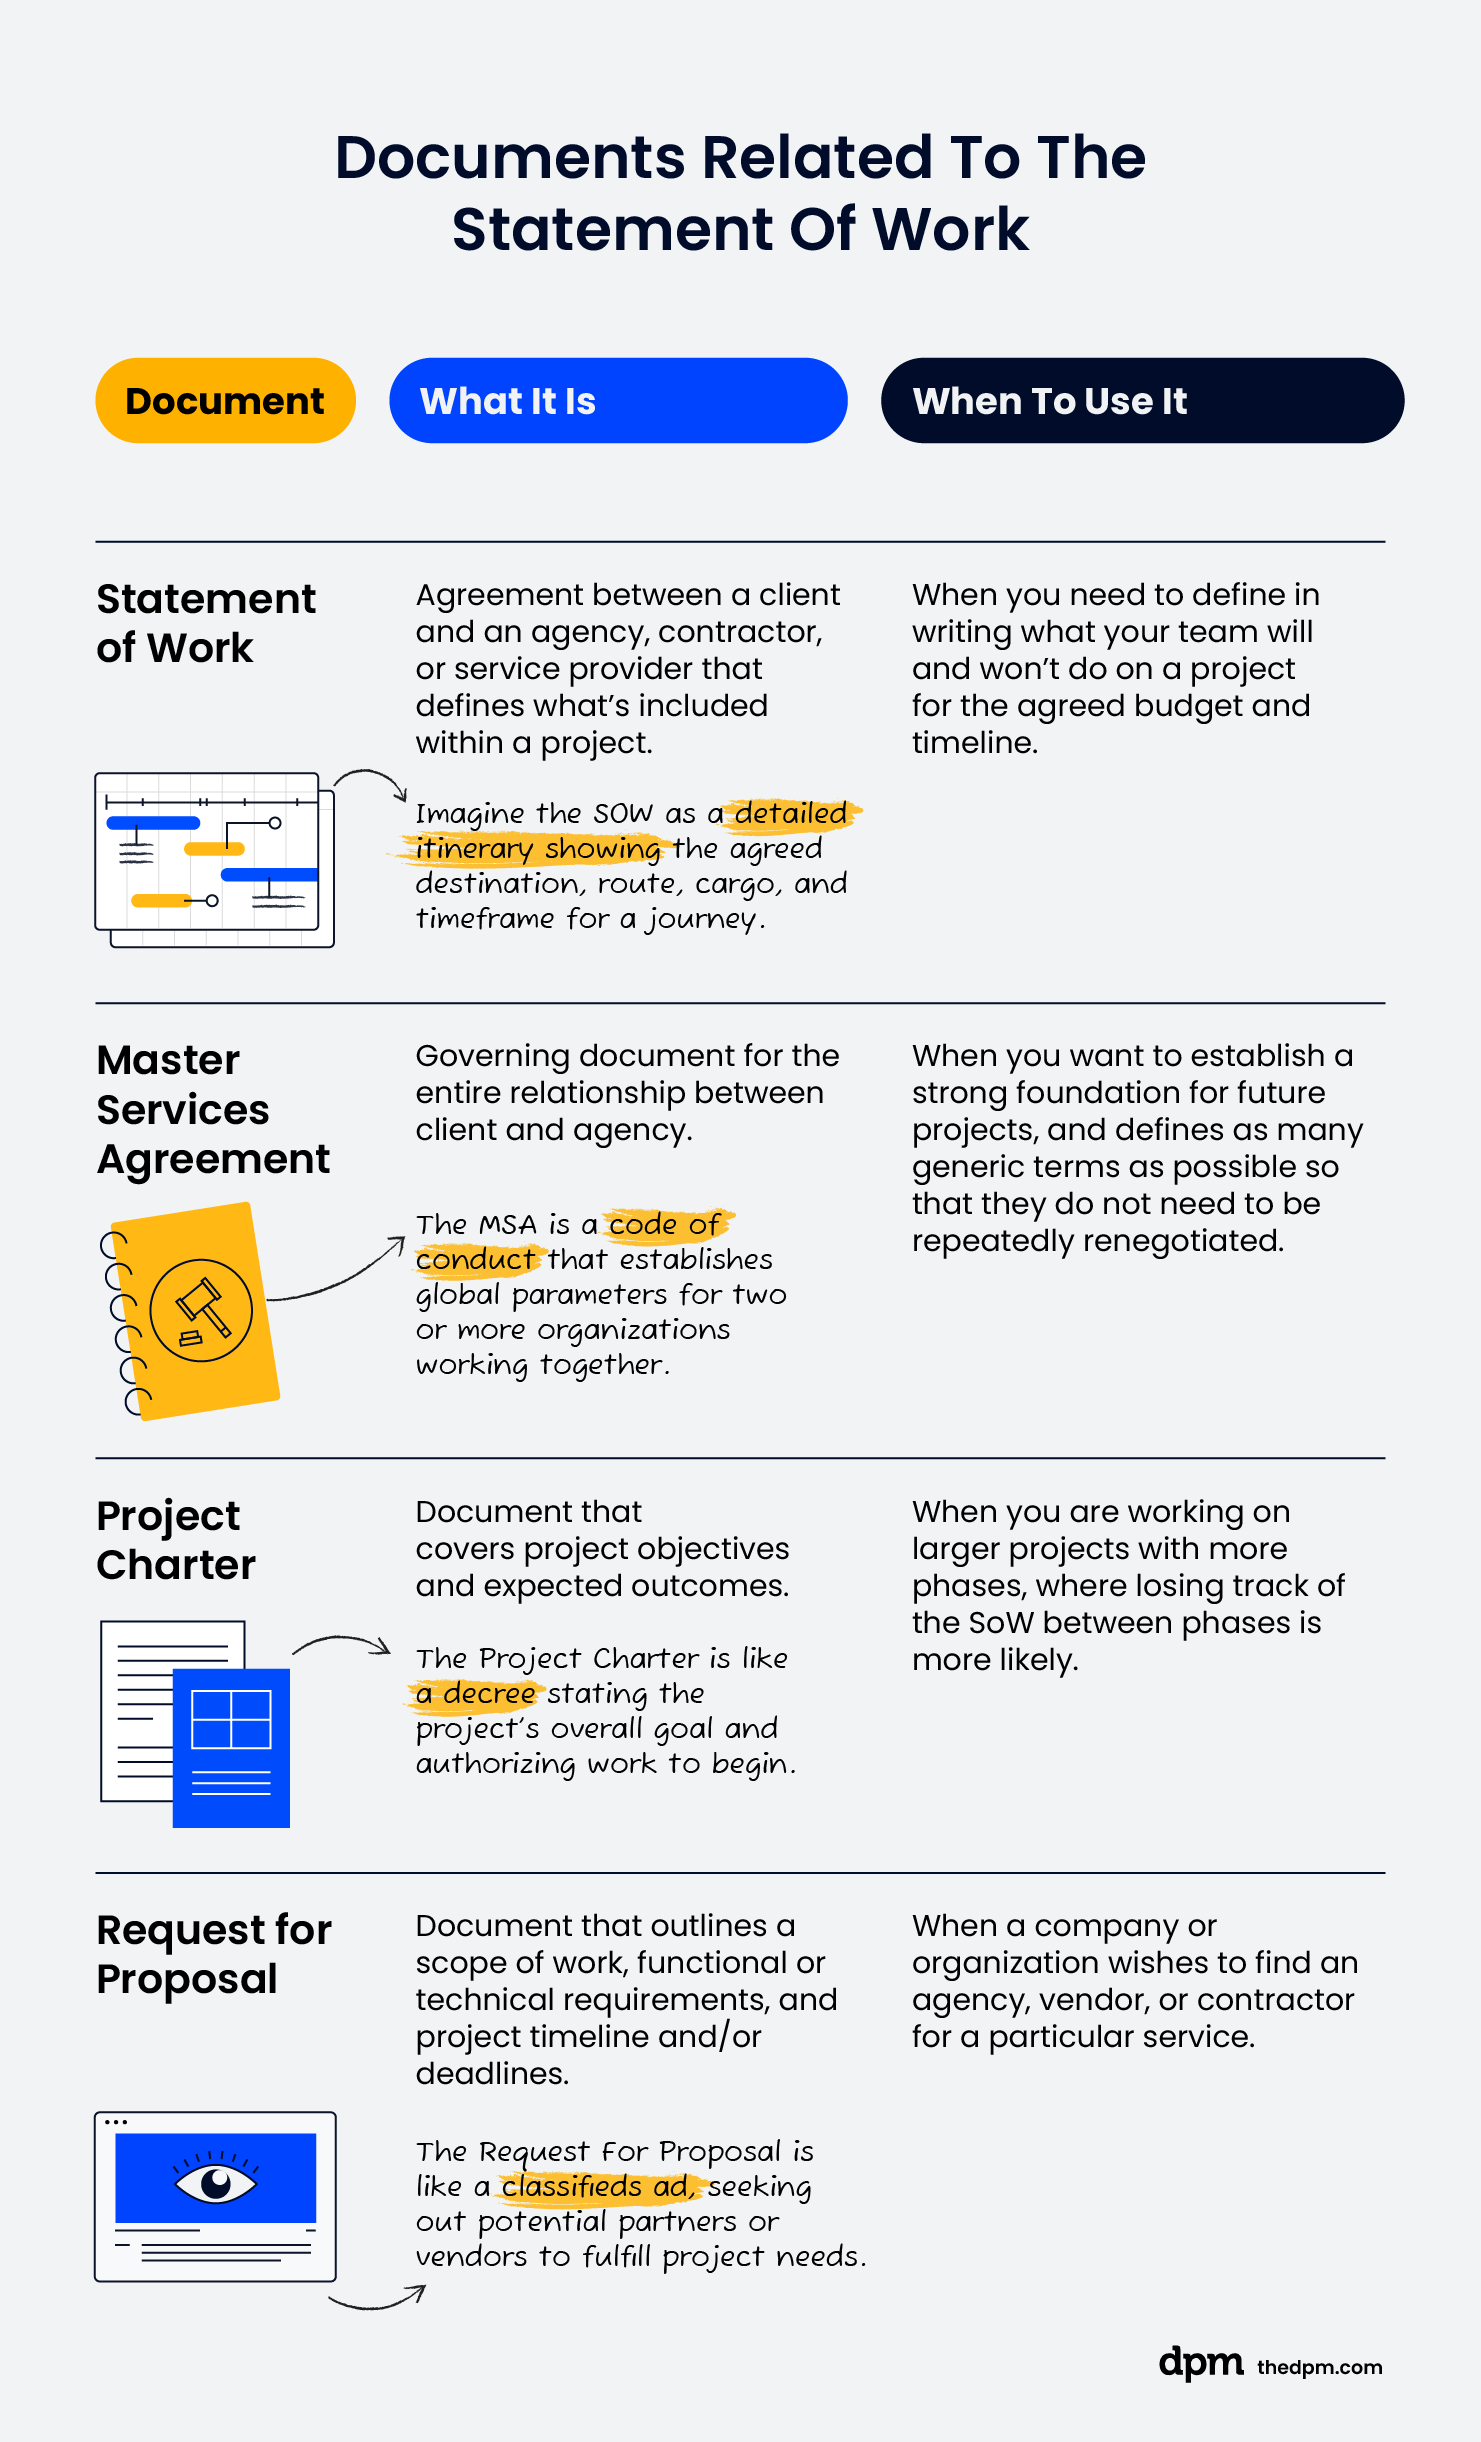 Infographic showcasing the differences between a statement of work and a master services agreement, project charter, and request for proposal